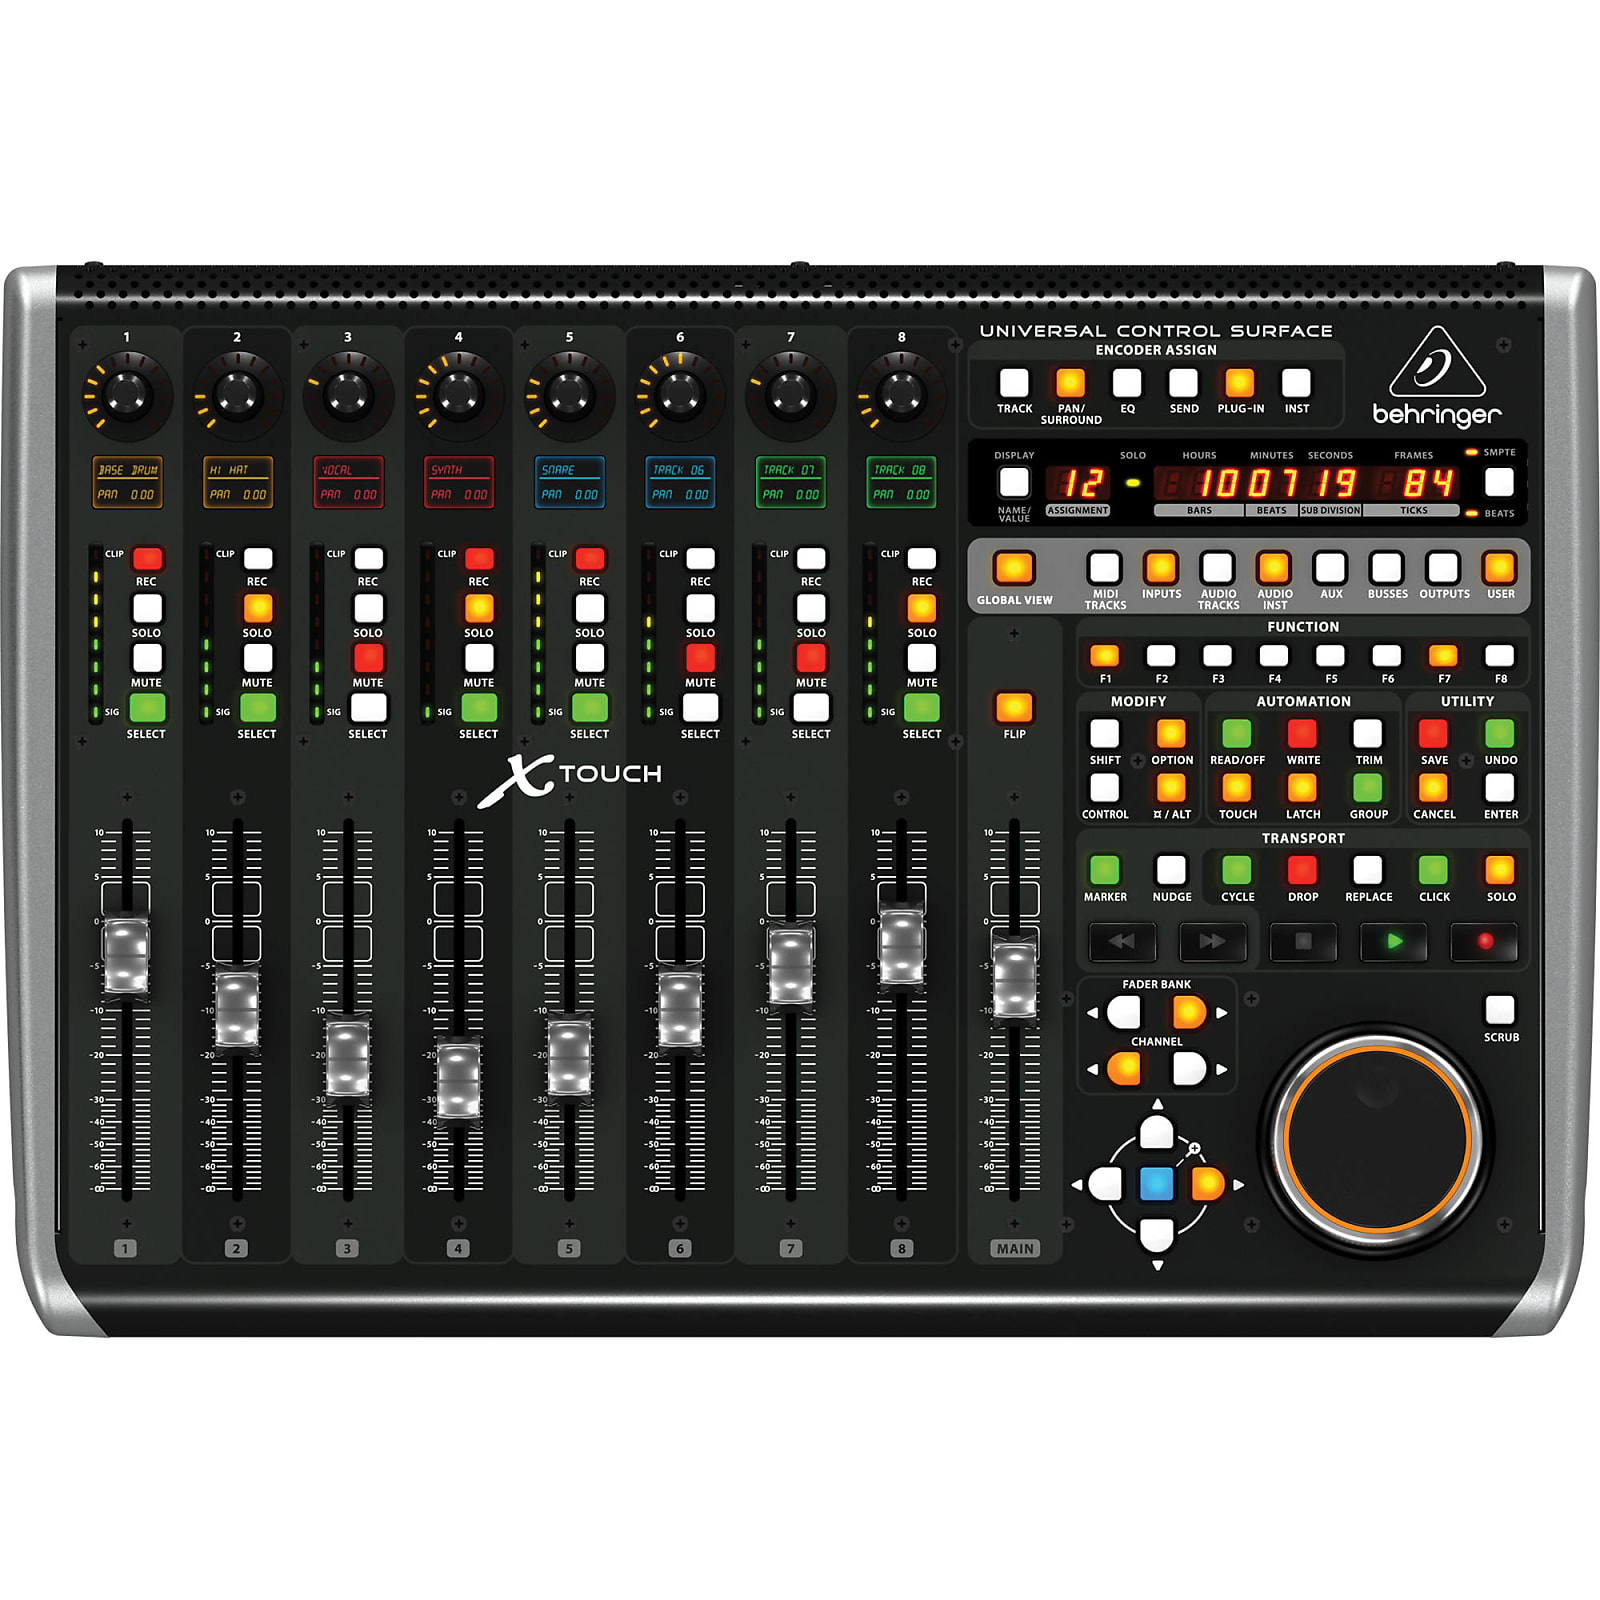 Behringer X-TOUCH Universal DAW Control Surface | Reverb